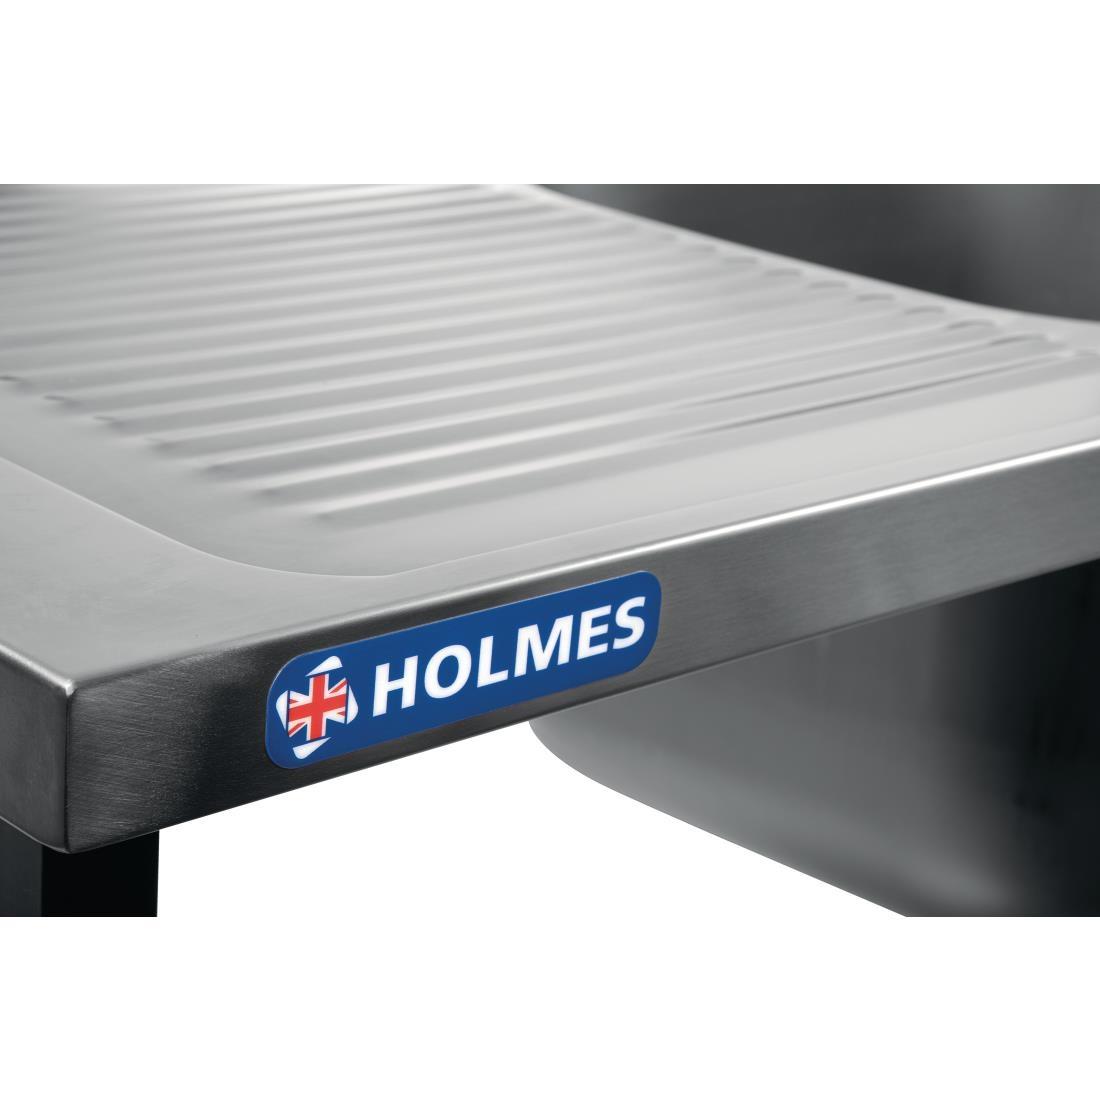 Holmes Stainless Steel Sink Double Drainer 1800mm - DR397  - 5